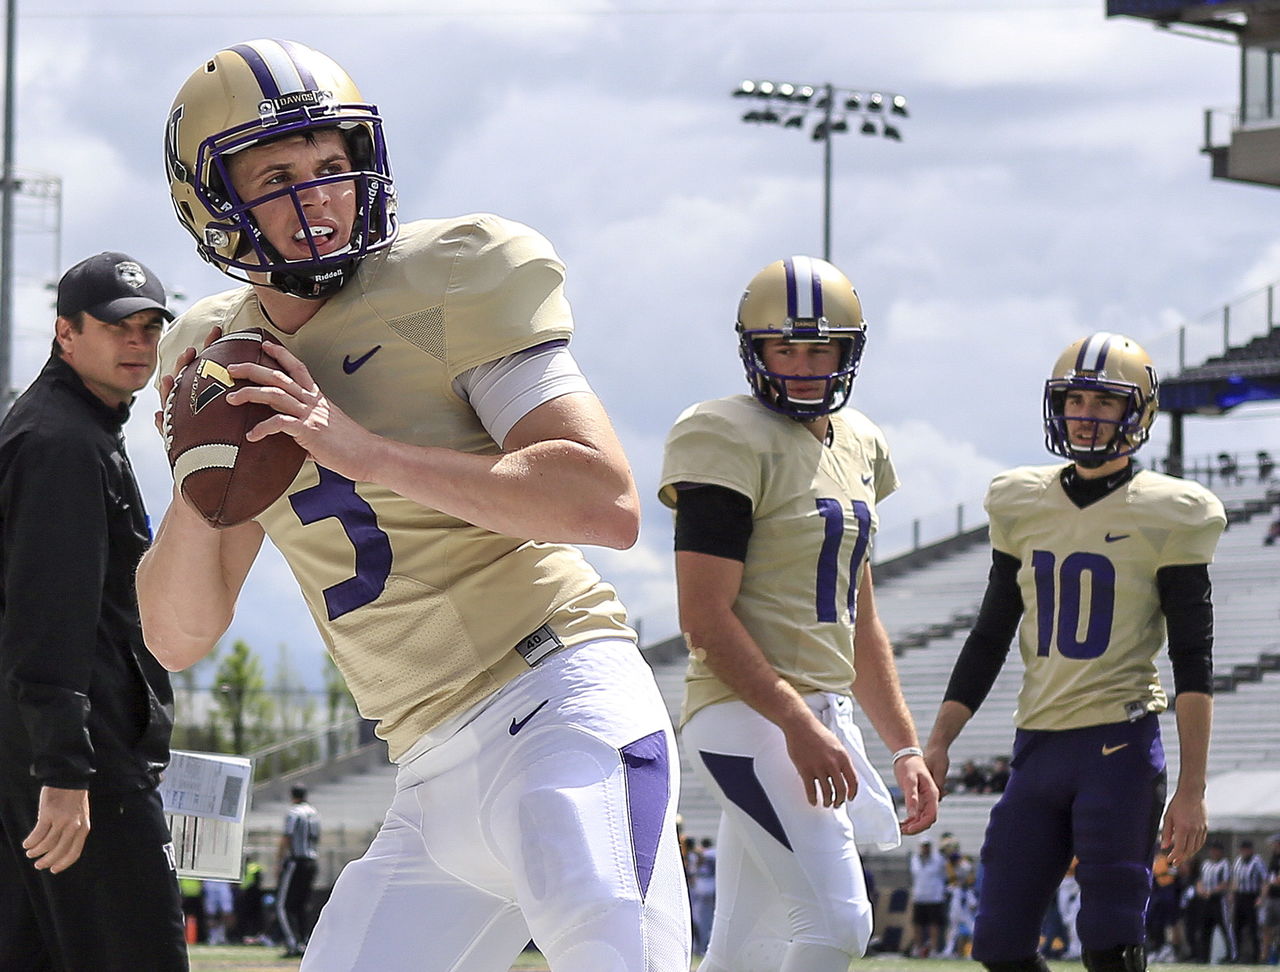 Jake Browning (3) drops back to pass during a drill with K.J. Carta-Samuels (center) and Tony Rodriguez looking on at Husky Football Spring Preview and Fan Fest on Saturday afternoon at Husky Stadium in Seattle.